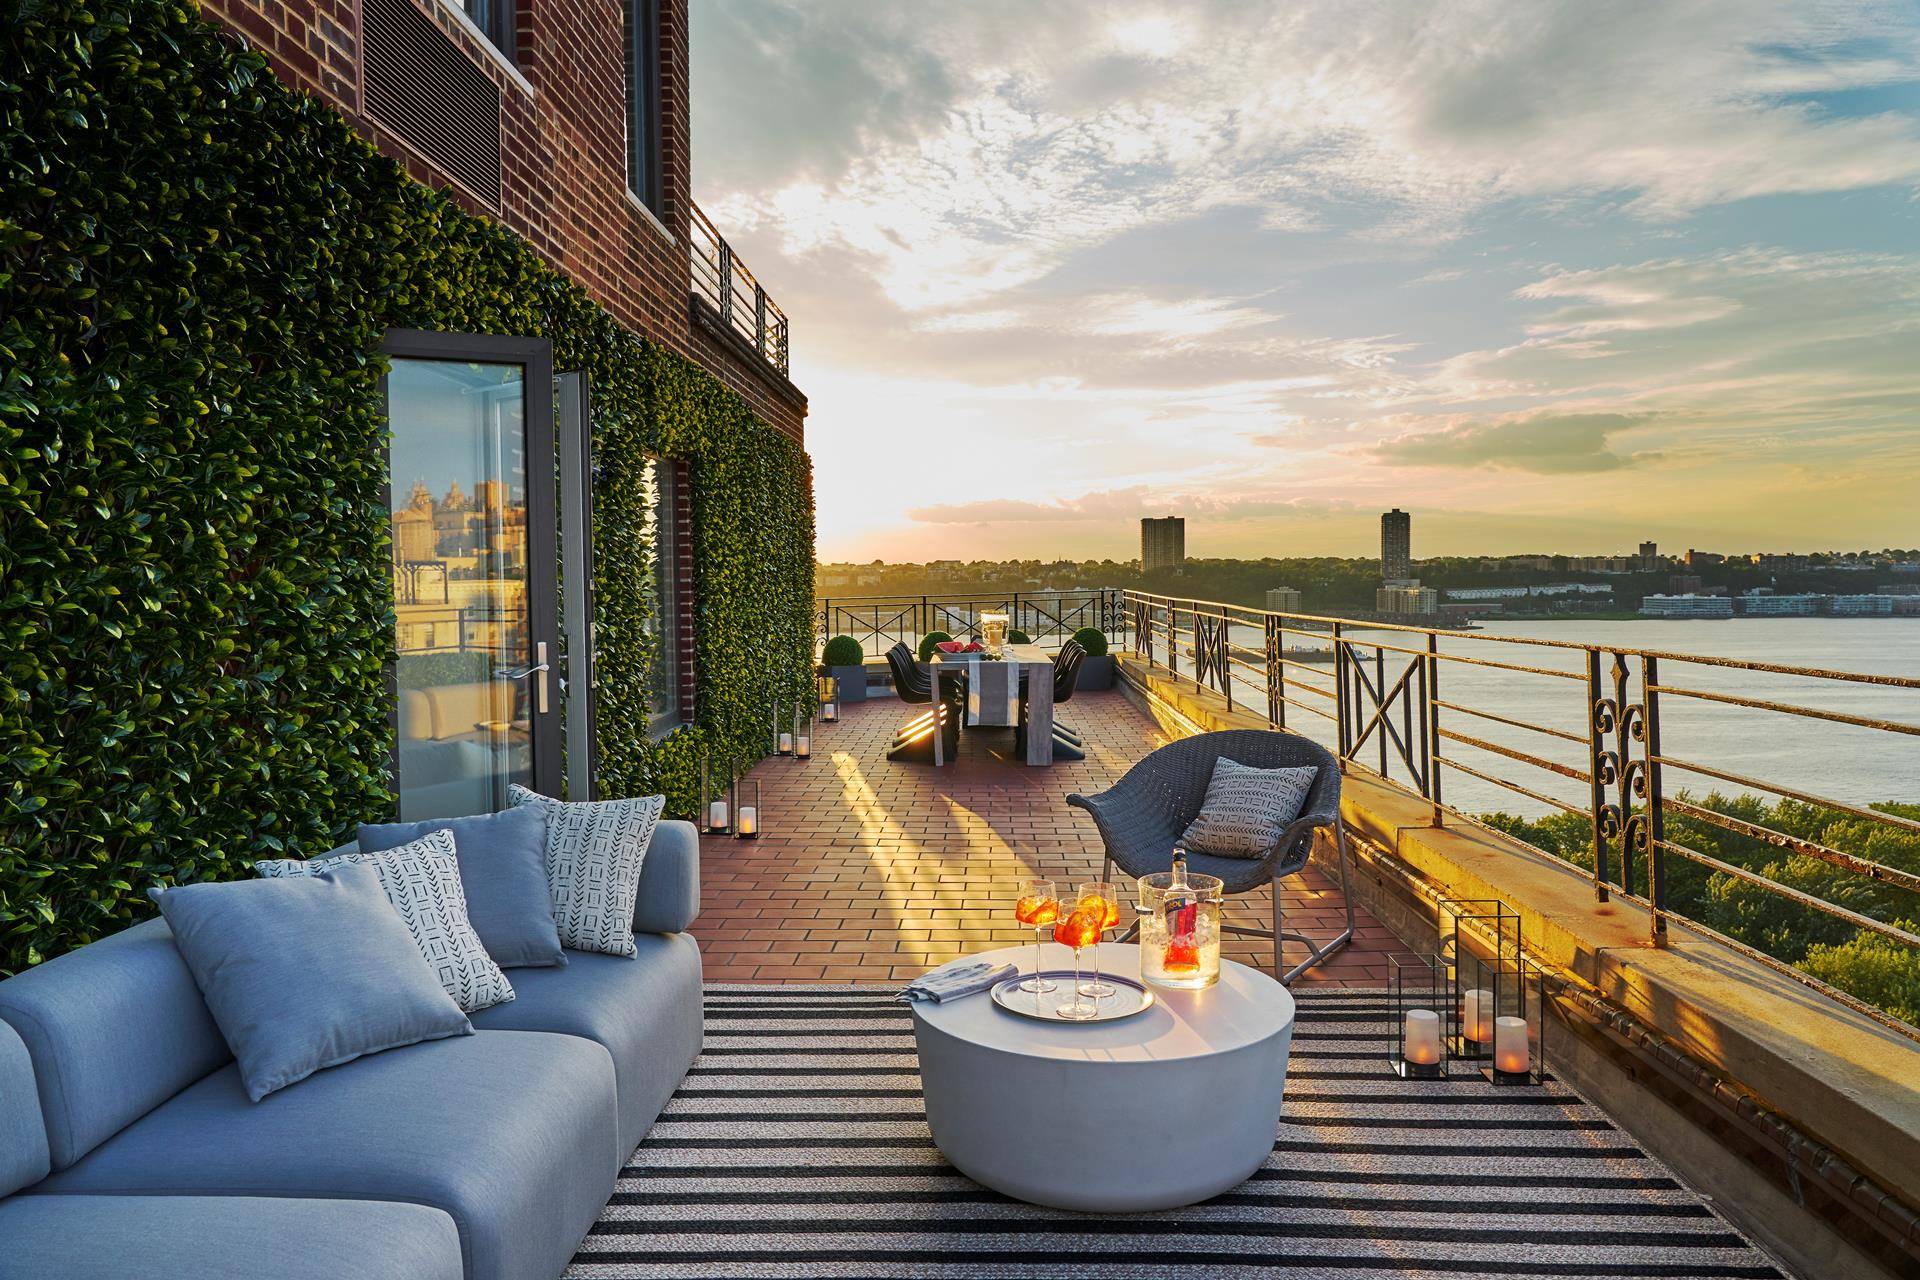 Sitting above a canopy of treetops overlooking miles of the Hudson River sweeping north to south, this substantive penthouse is perfect for entertaining large groups or simply enjoying the serenity ...